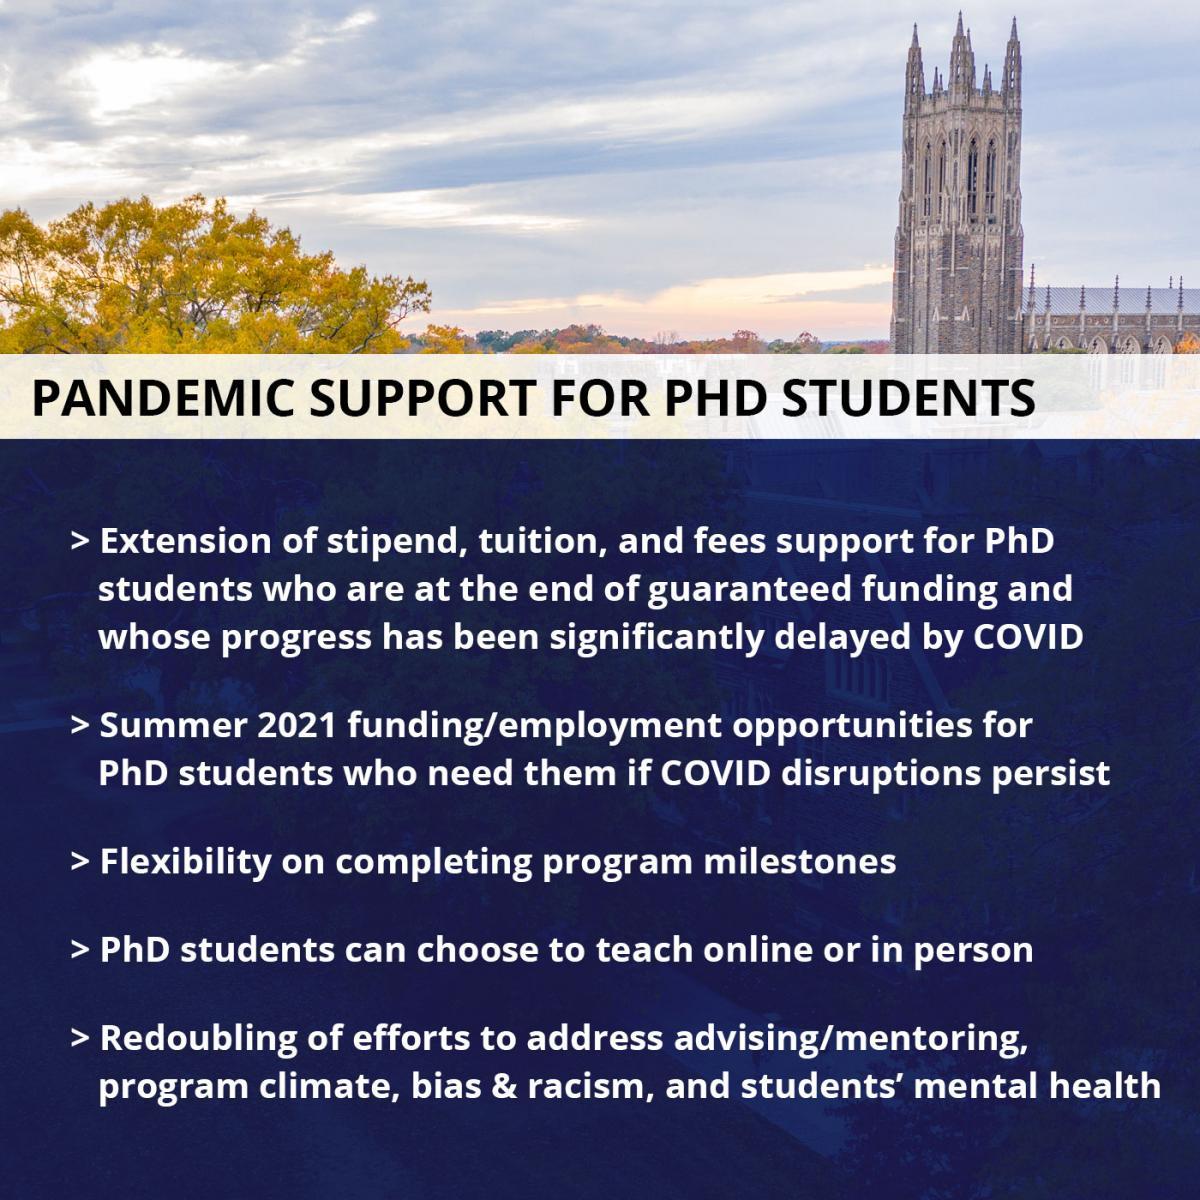 Pandemic support measures for PhDs